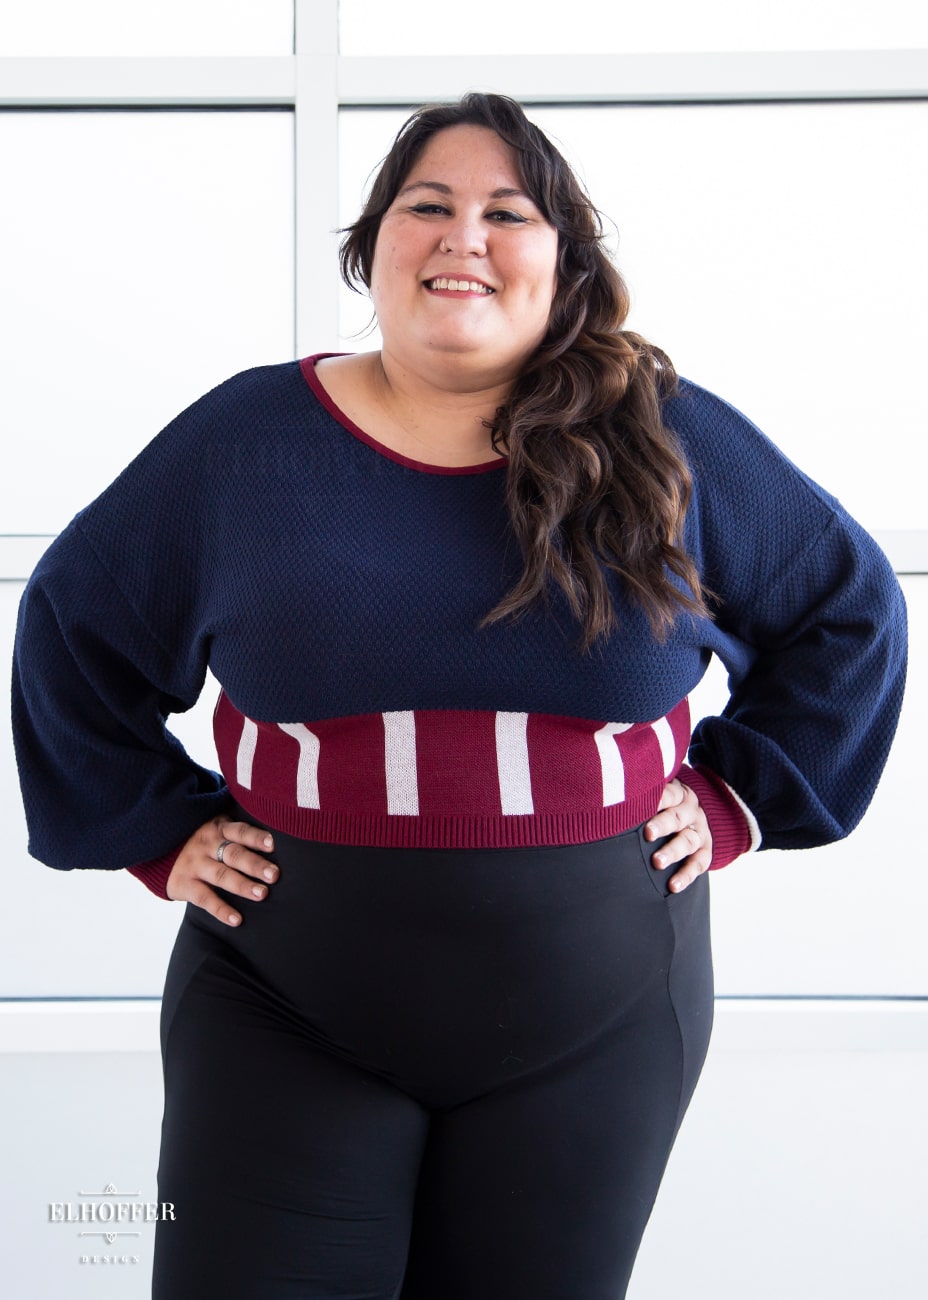 Alysia, a sun kissed skin size XL model with long brown hair, is wearing the red, white and blue knit oversized crop top with bishop sleeves. The sleeves and top of the crop are blue with a waffle knit, the waist is vertical red and white stripes. The cuffs are mainly red with a white detail. There is also a red detail at the neckline.